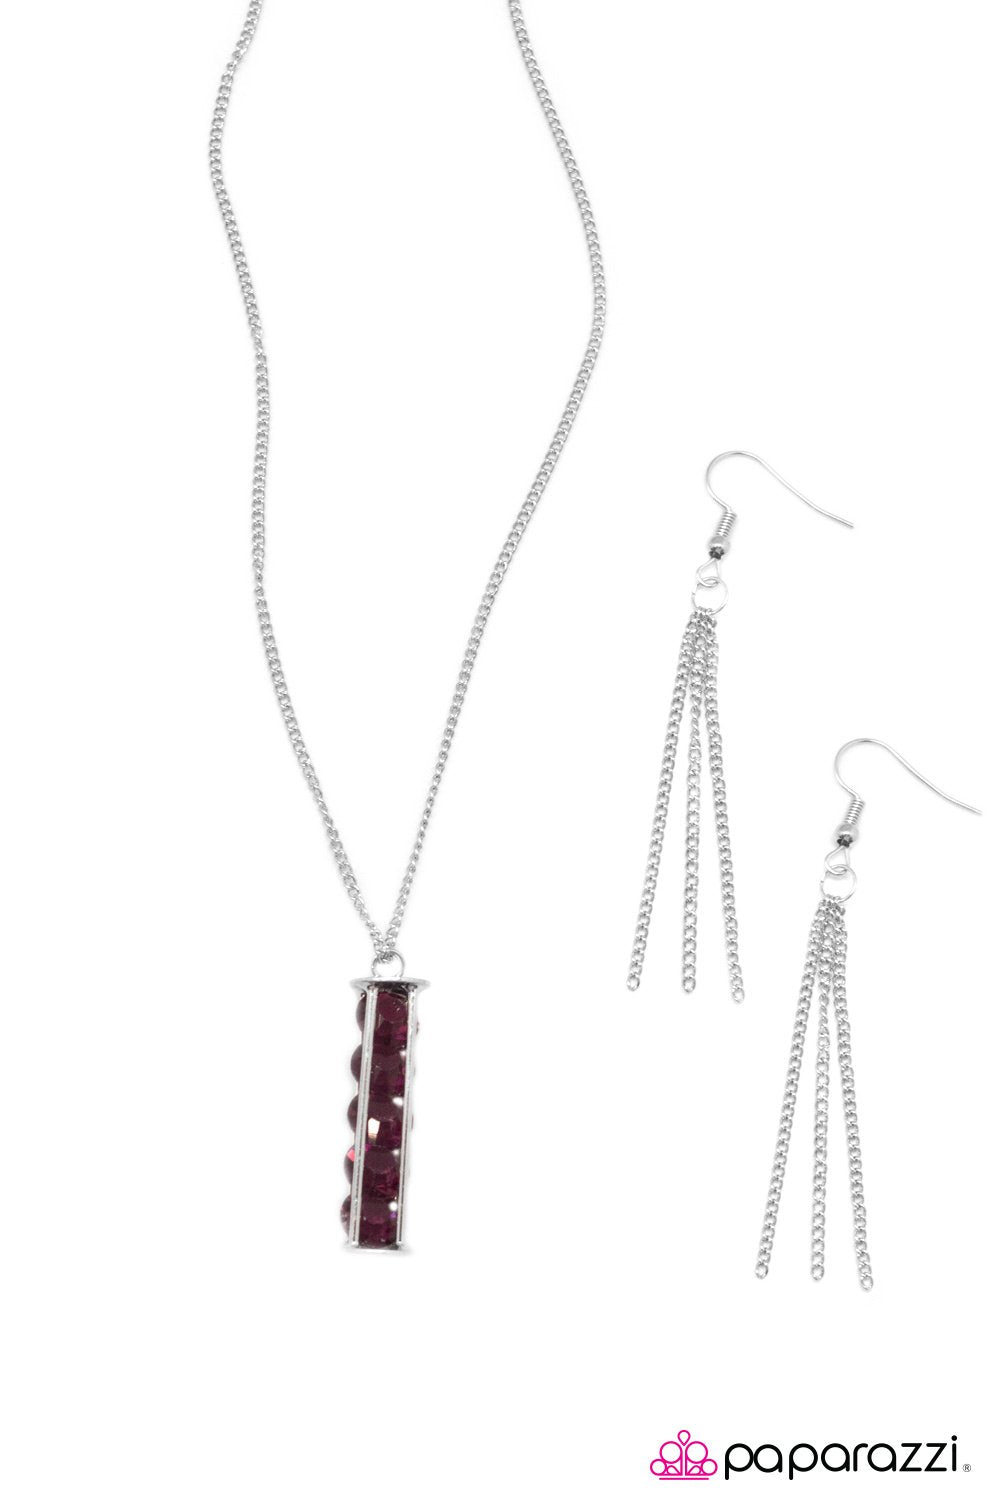 Awestruck Silver and Purple Necklace - Paparazzi Accessories-CarasShop.com - $5 Jewelry by Cara Jewels